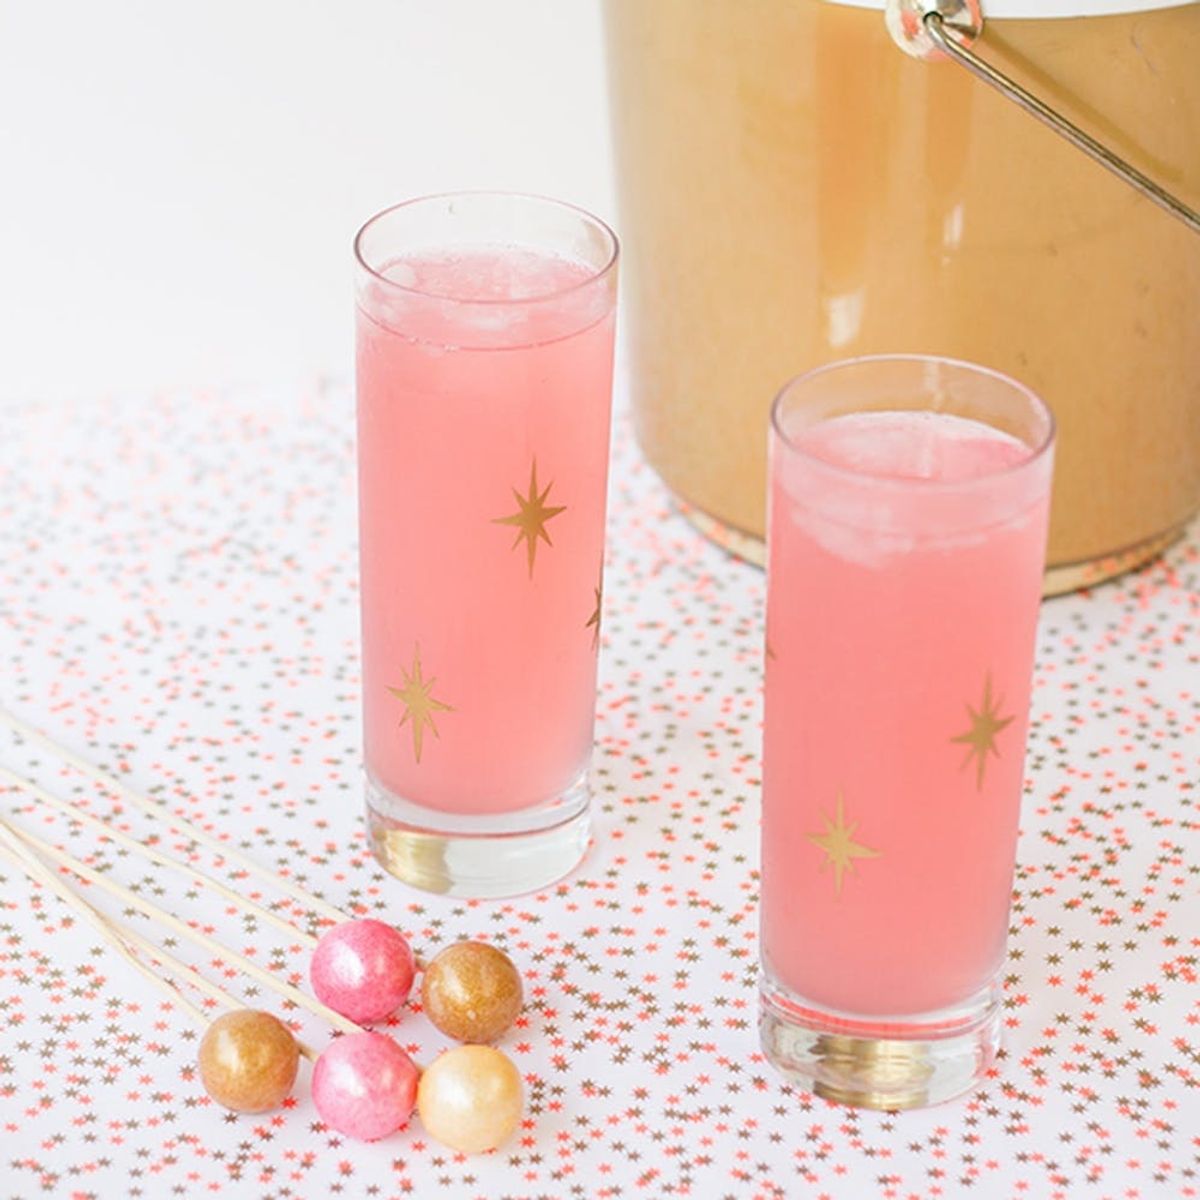 19 Drinking Glasses You Can DIY for Your Bachelorette Party